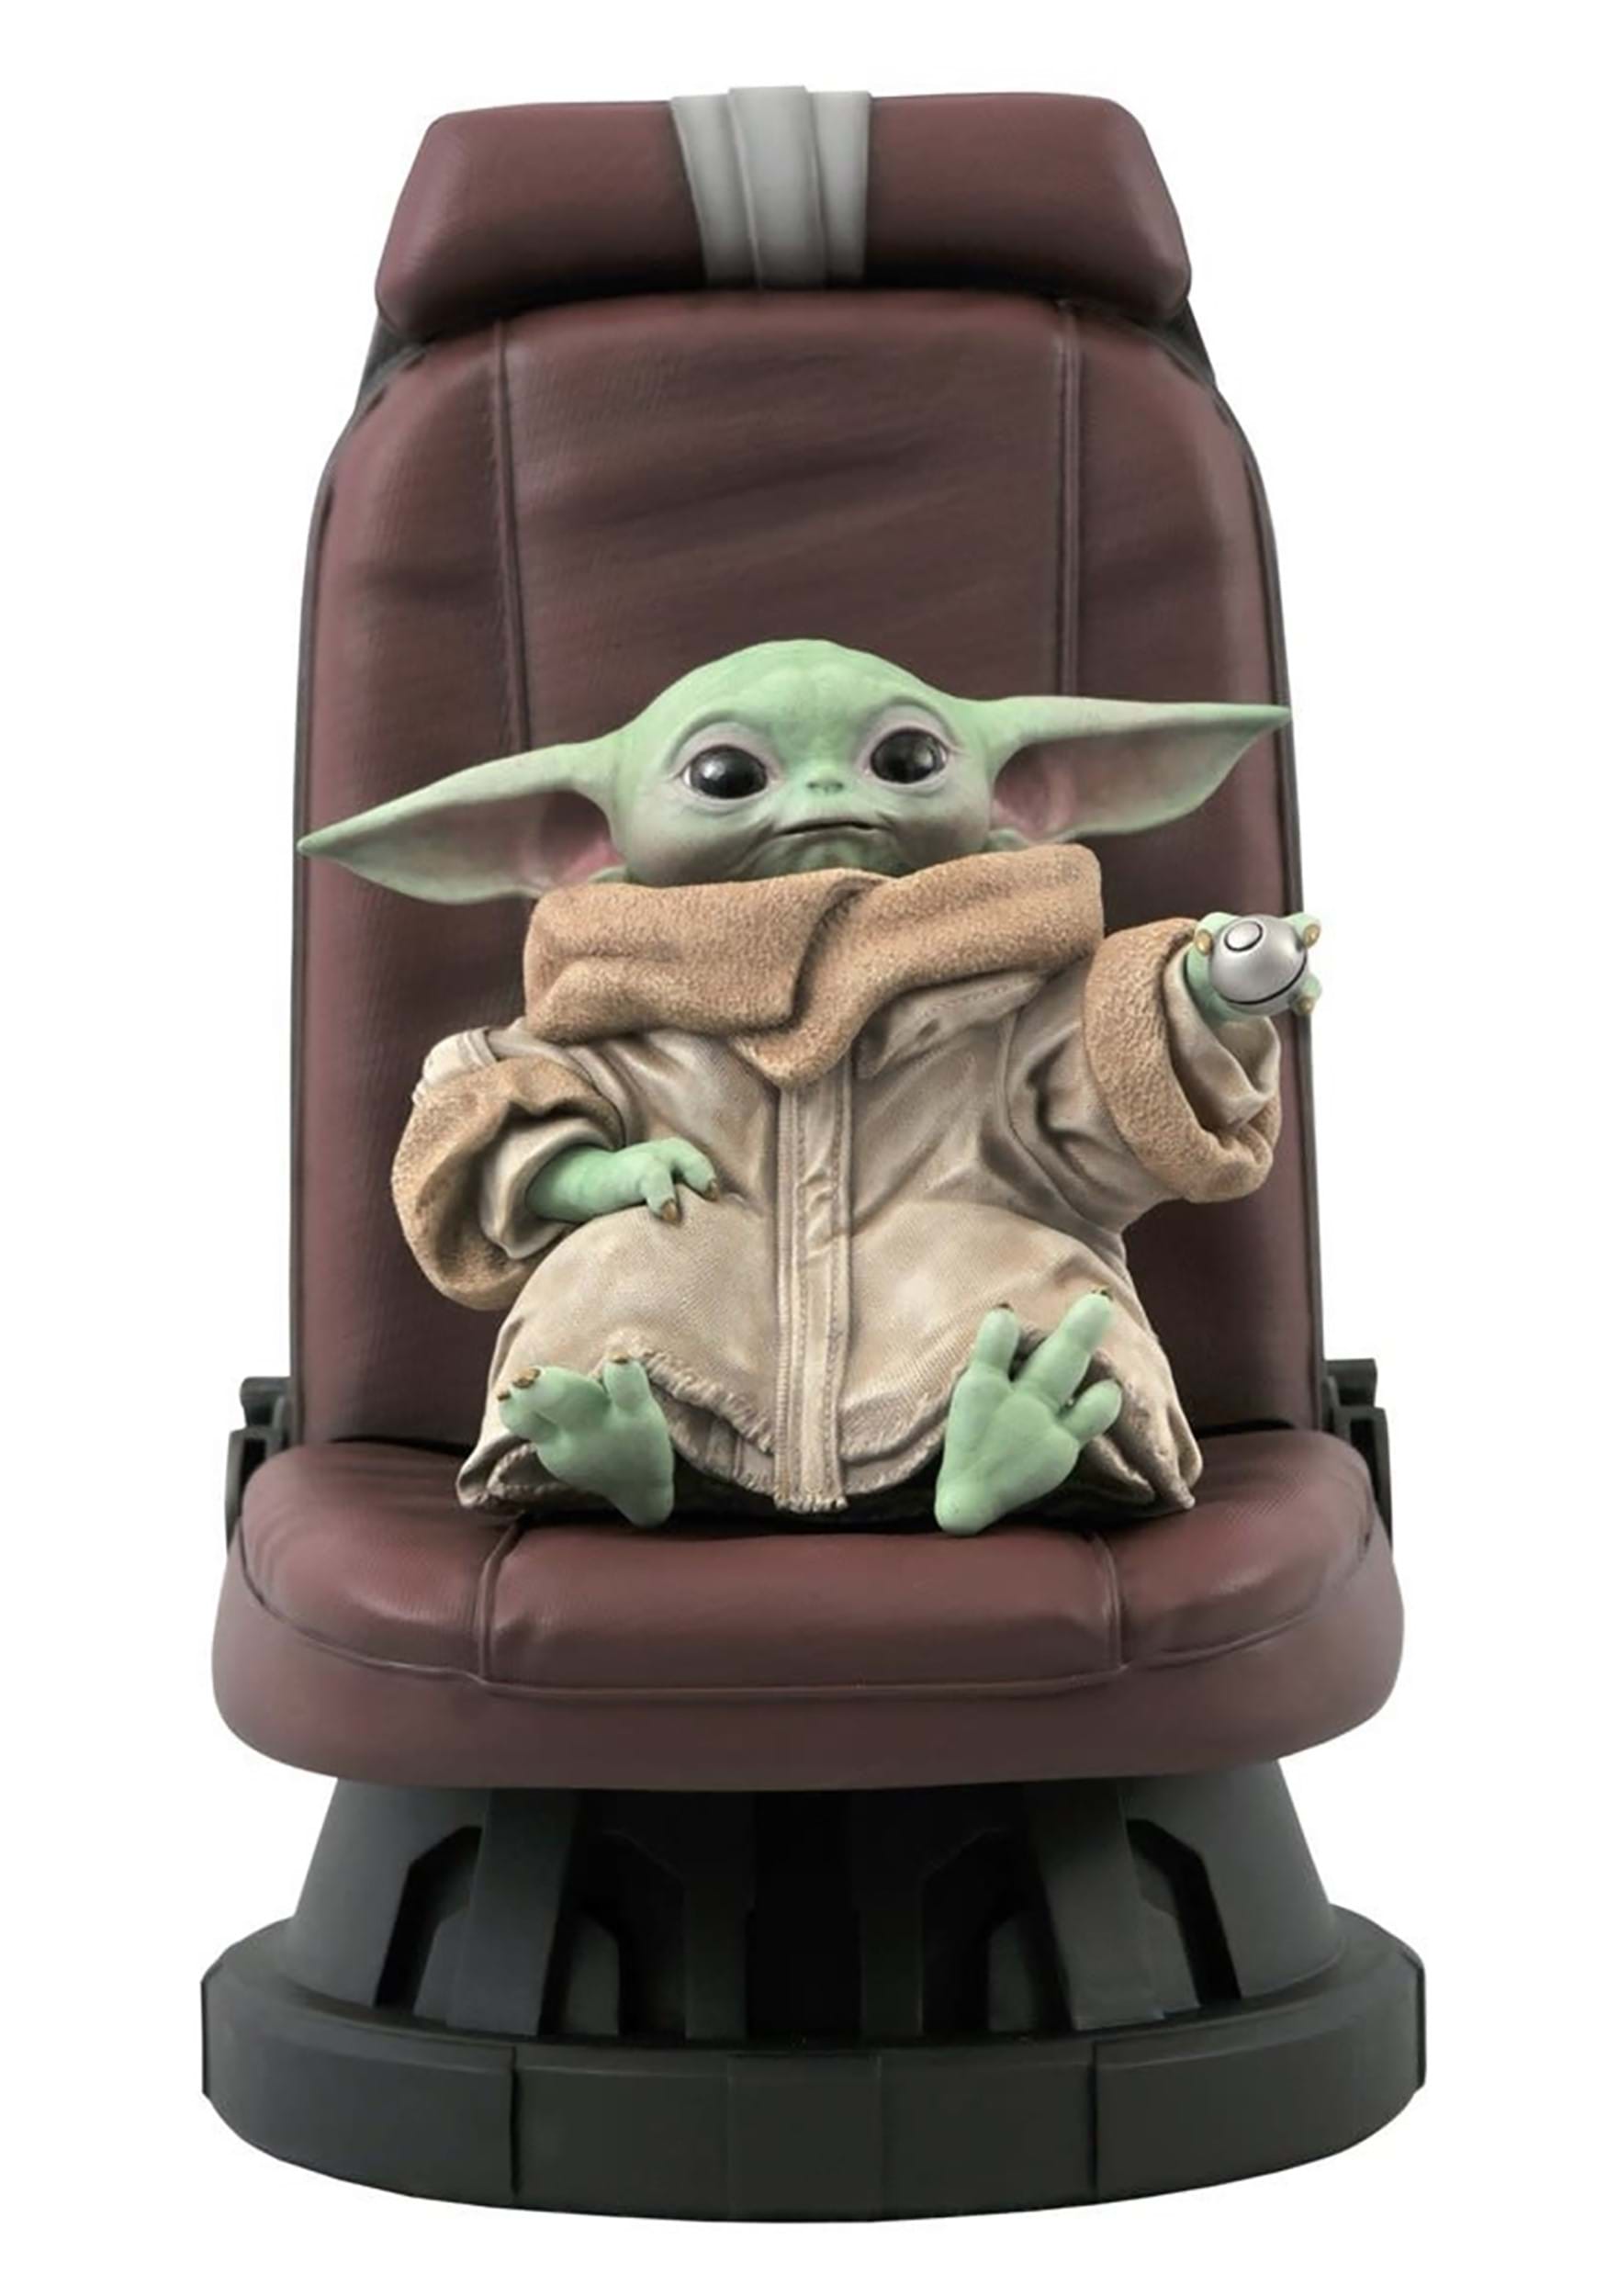 Gentle Giant Star Wars: The Mandalorian- Child in Chair Statue